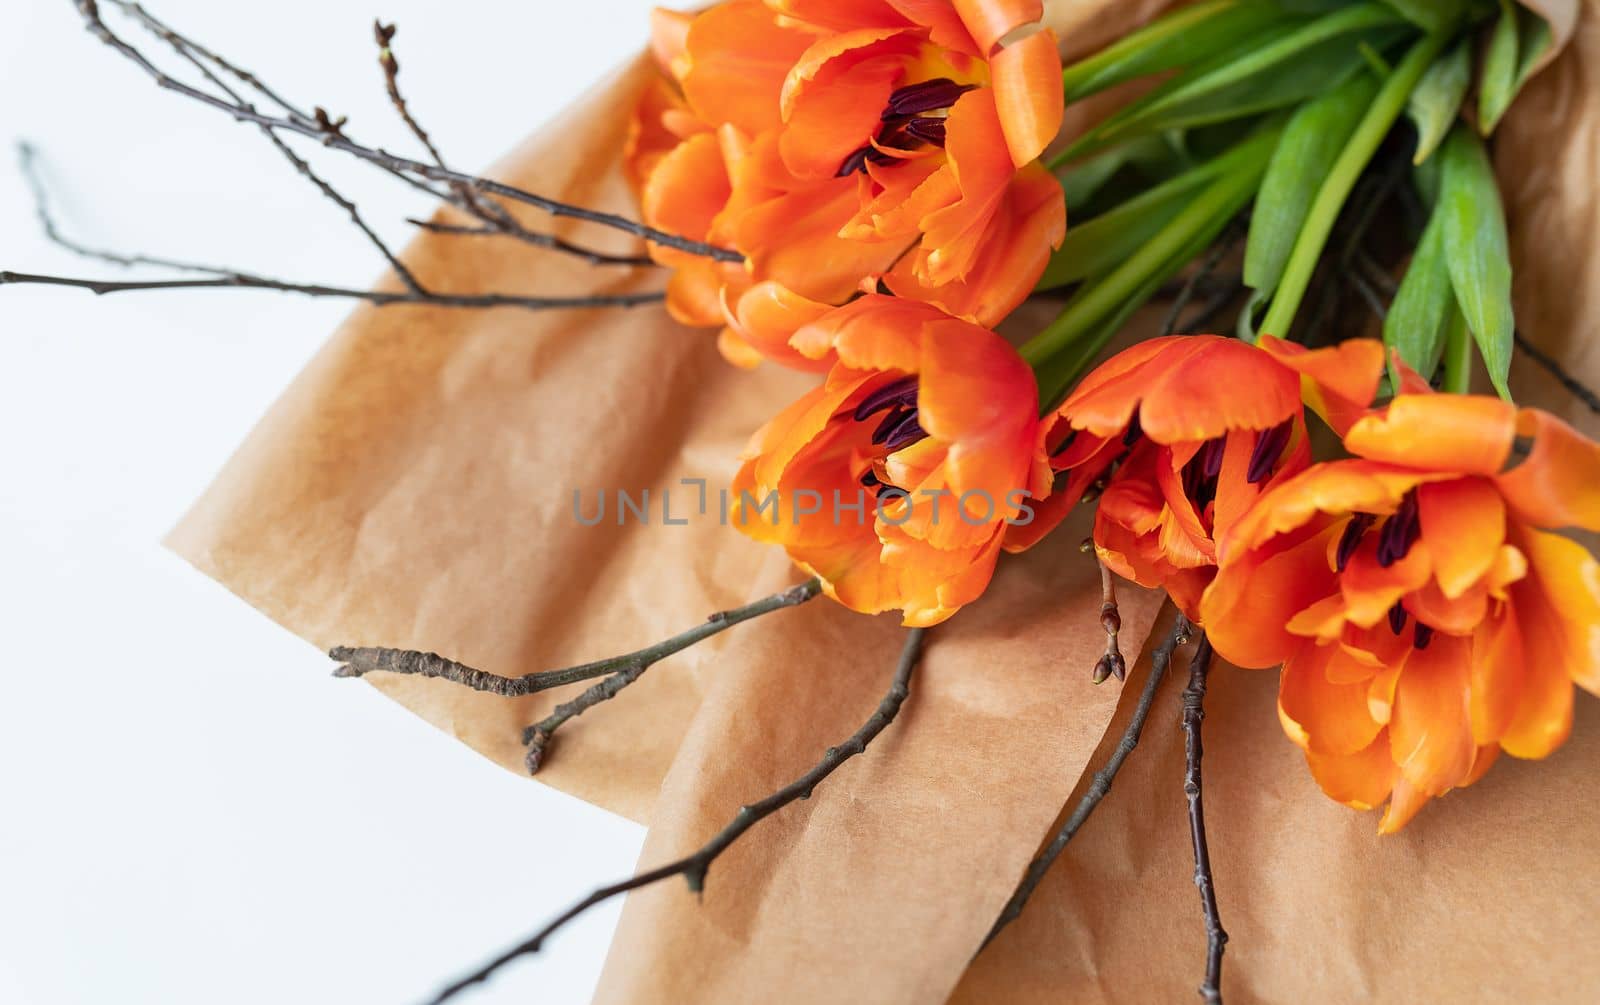 A very beautiful spring bouquet of orange peony tulips, along with branches of young cherries, lies in craft paper on a white table. by sfinks